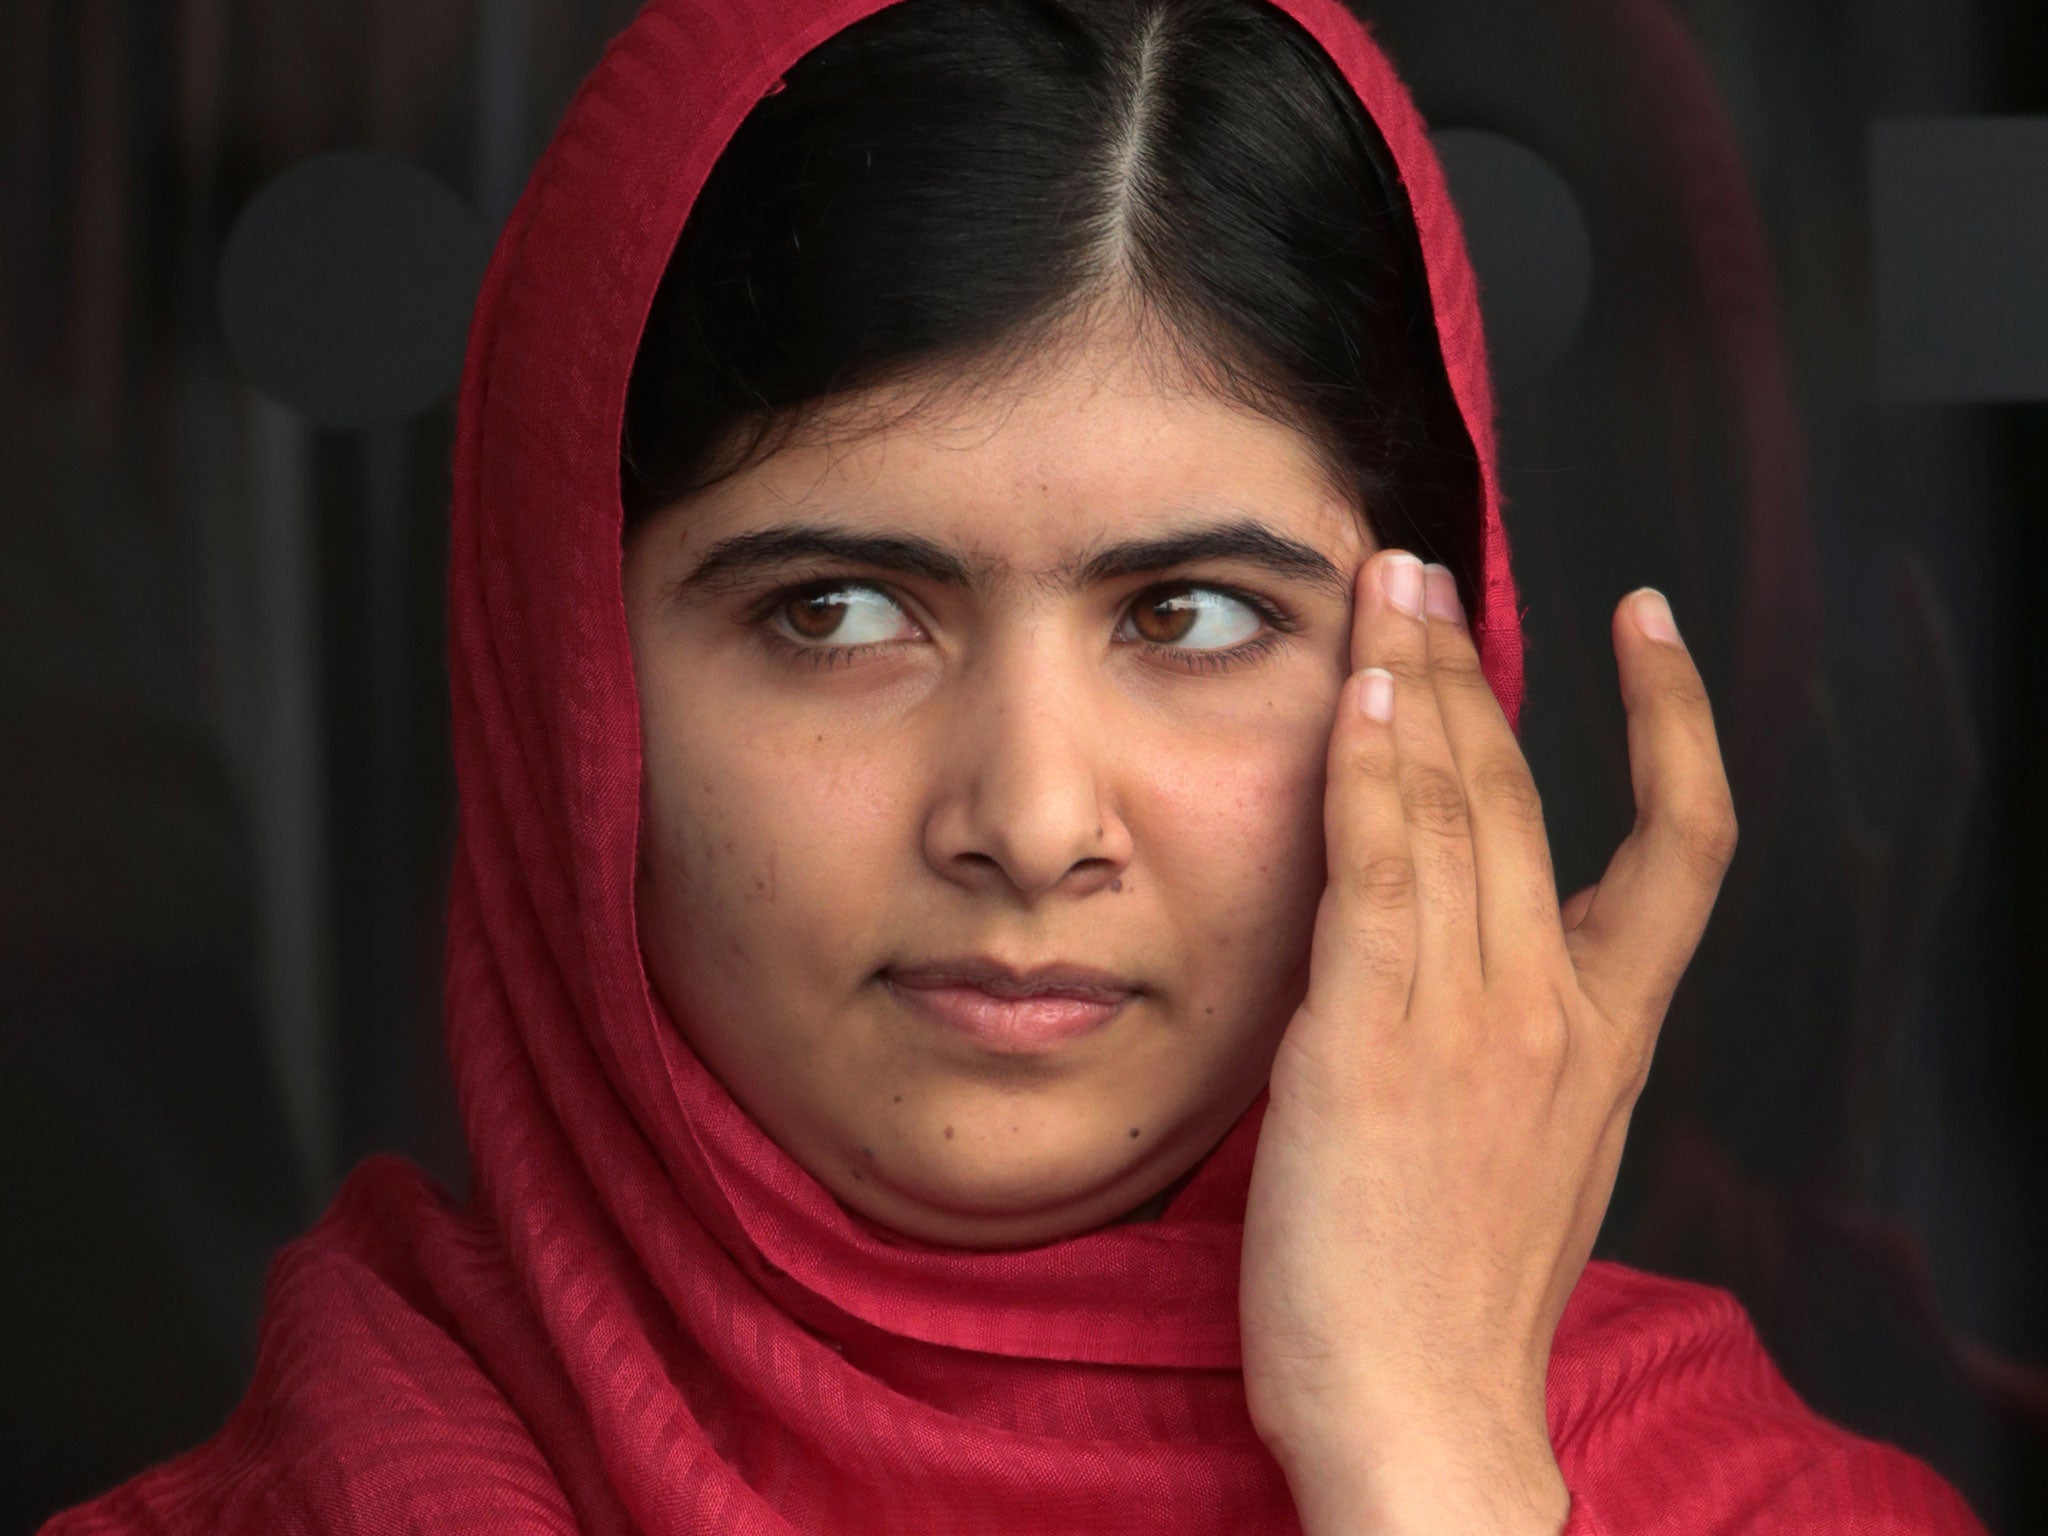 Malala Yousafzai opens the new Library of Birmingham at Centenary Square on September 3, 2013 in Birmingham, England.